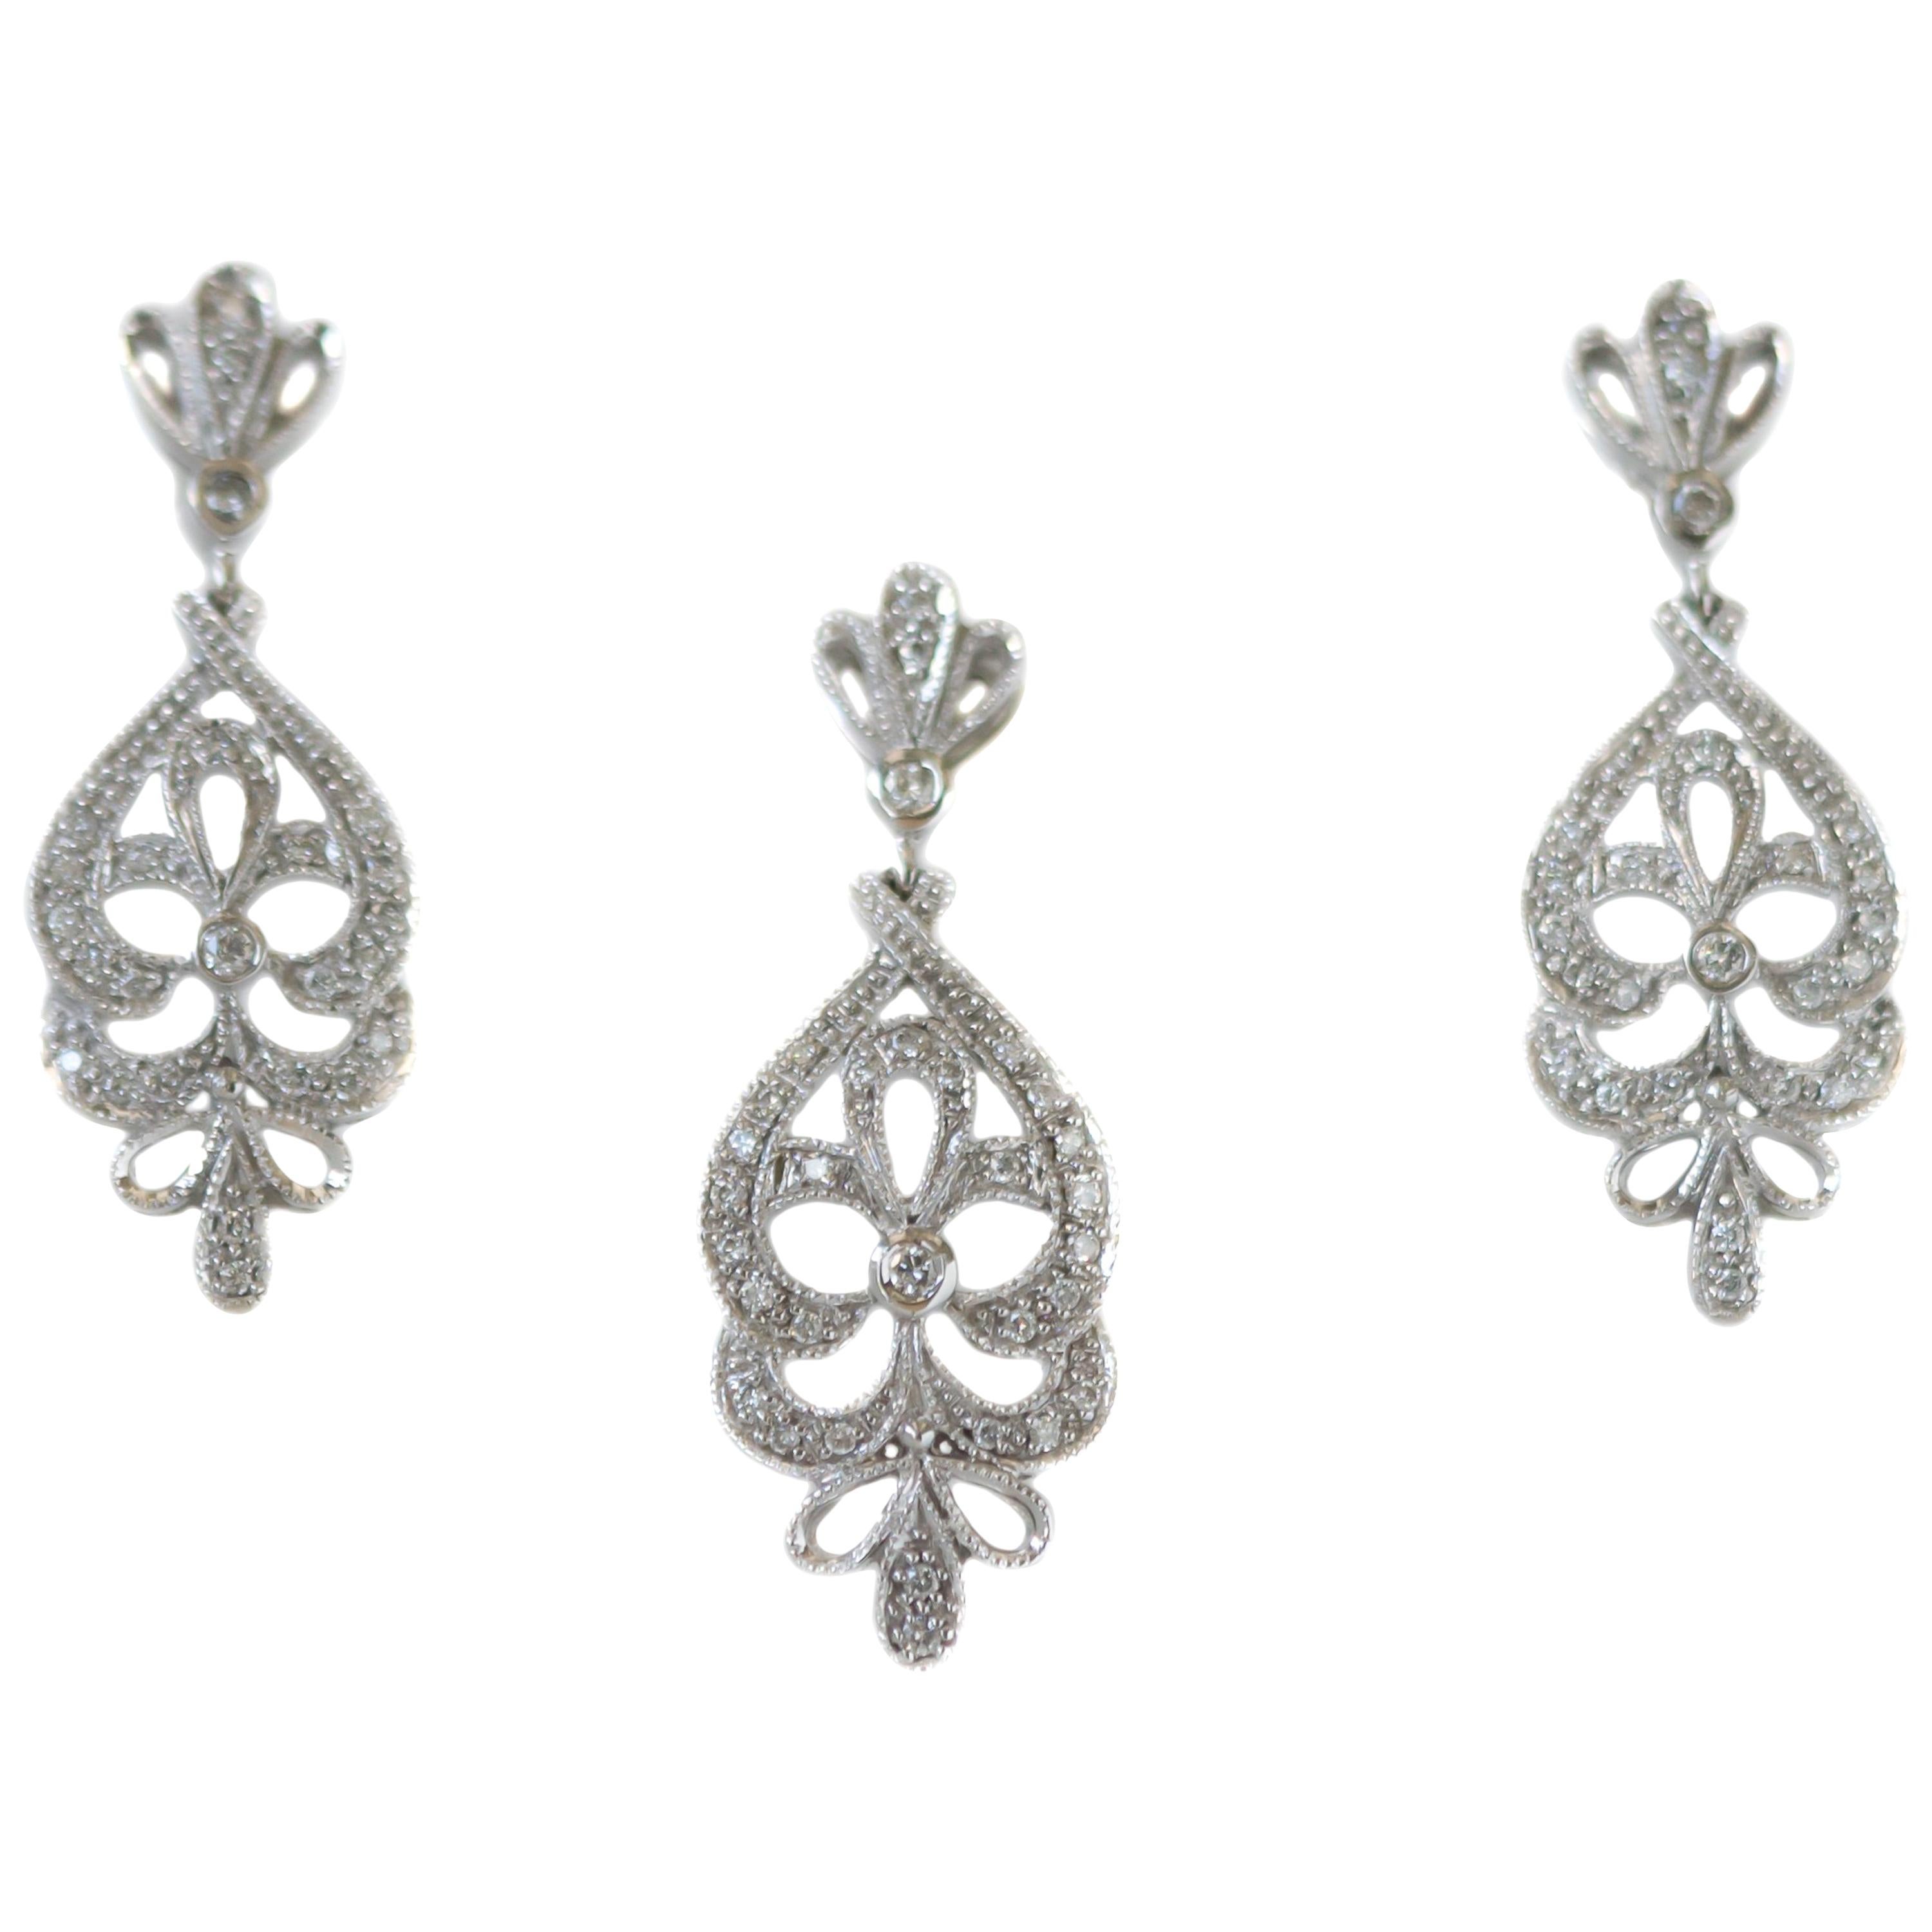 1950s Diamond Chandelier Earring and Necklace Set in 14 Karat White Gold